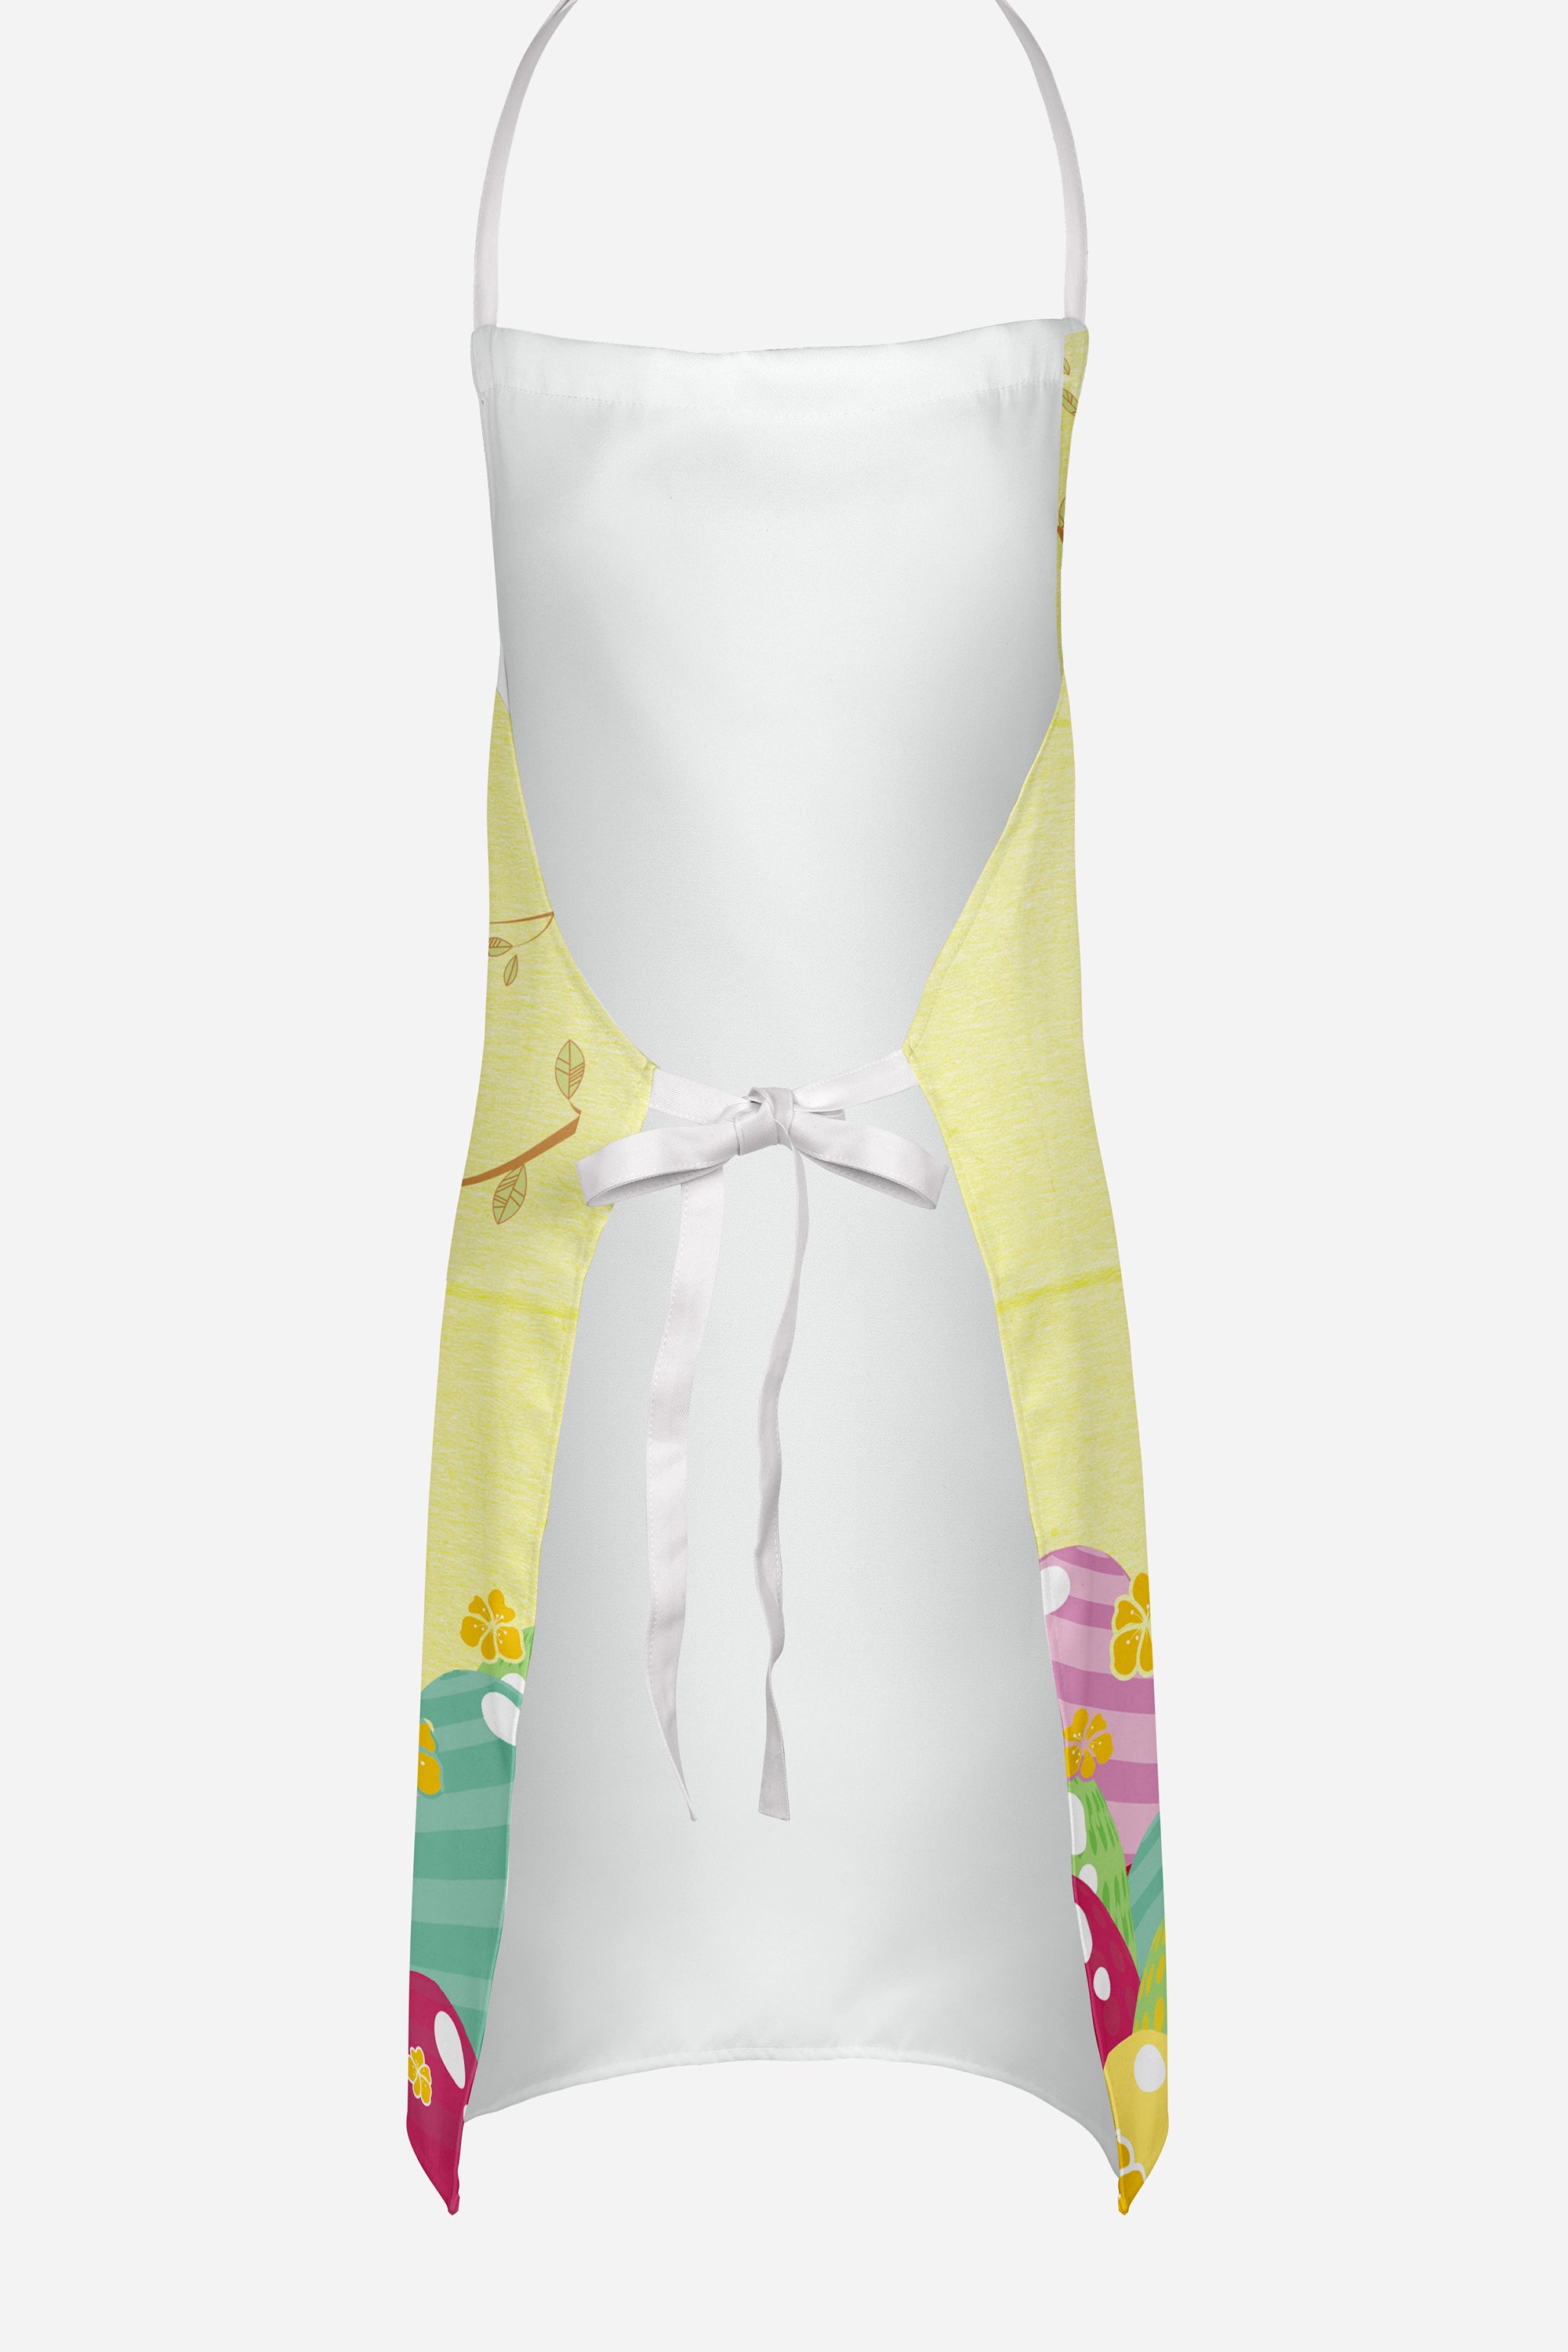 Easter Eggs Smooth Fox Terrier Apron BB6098APRON  the-store.com.